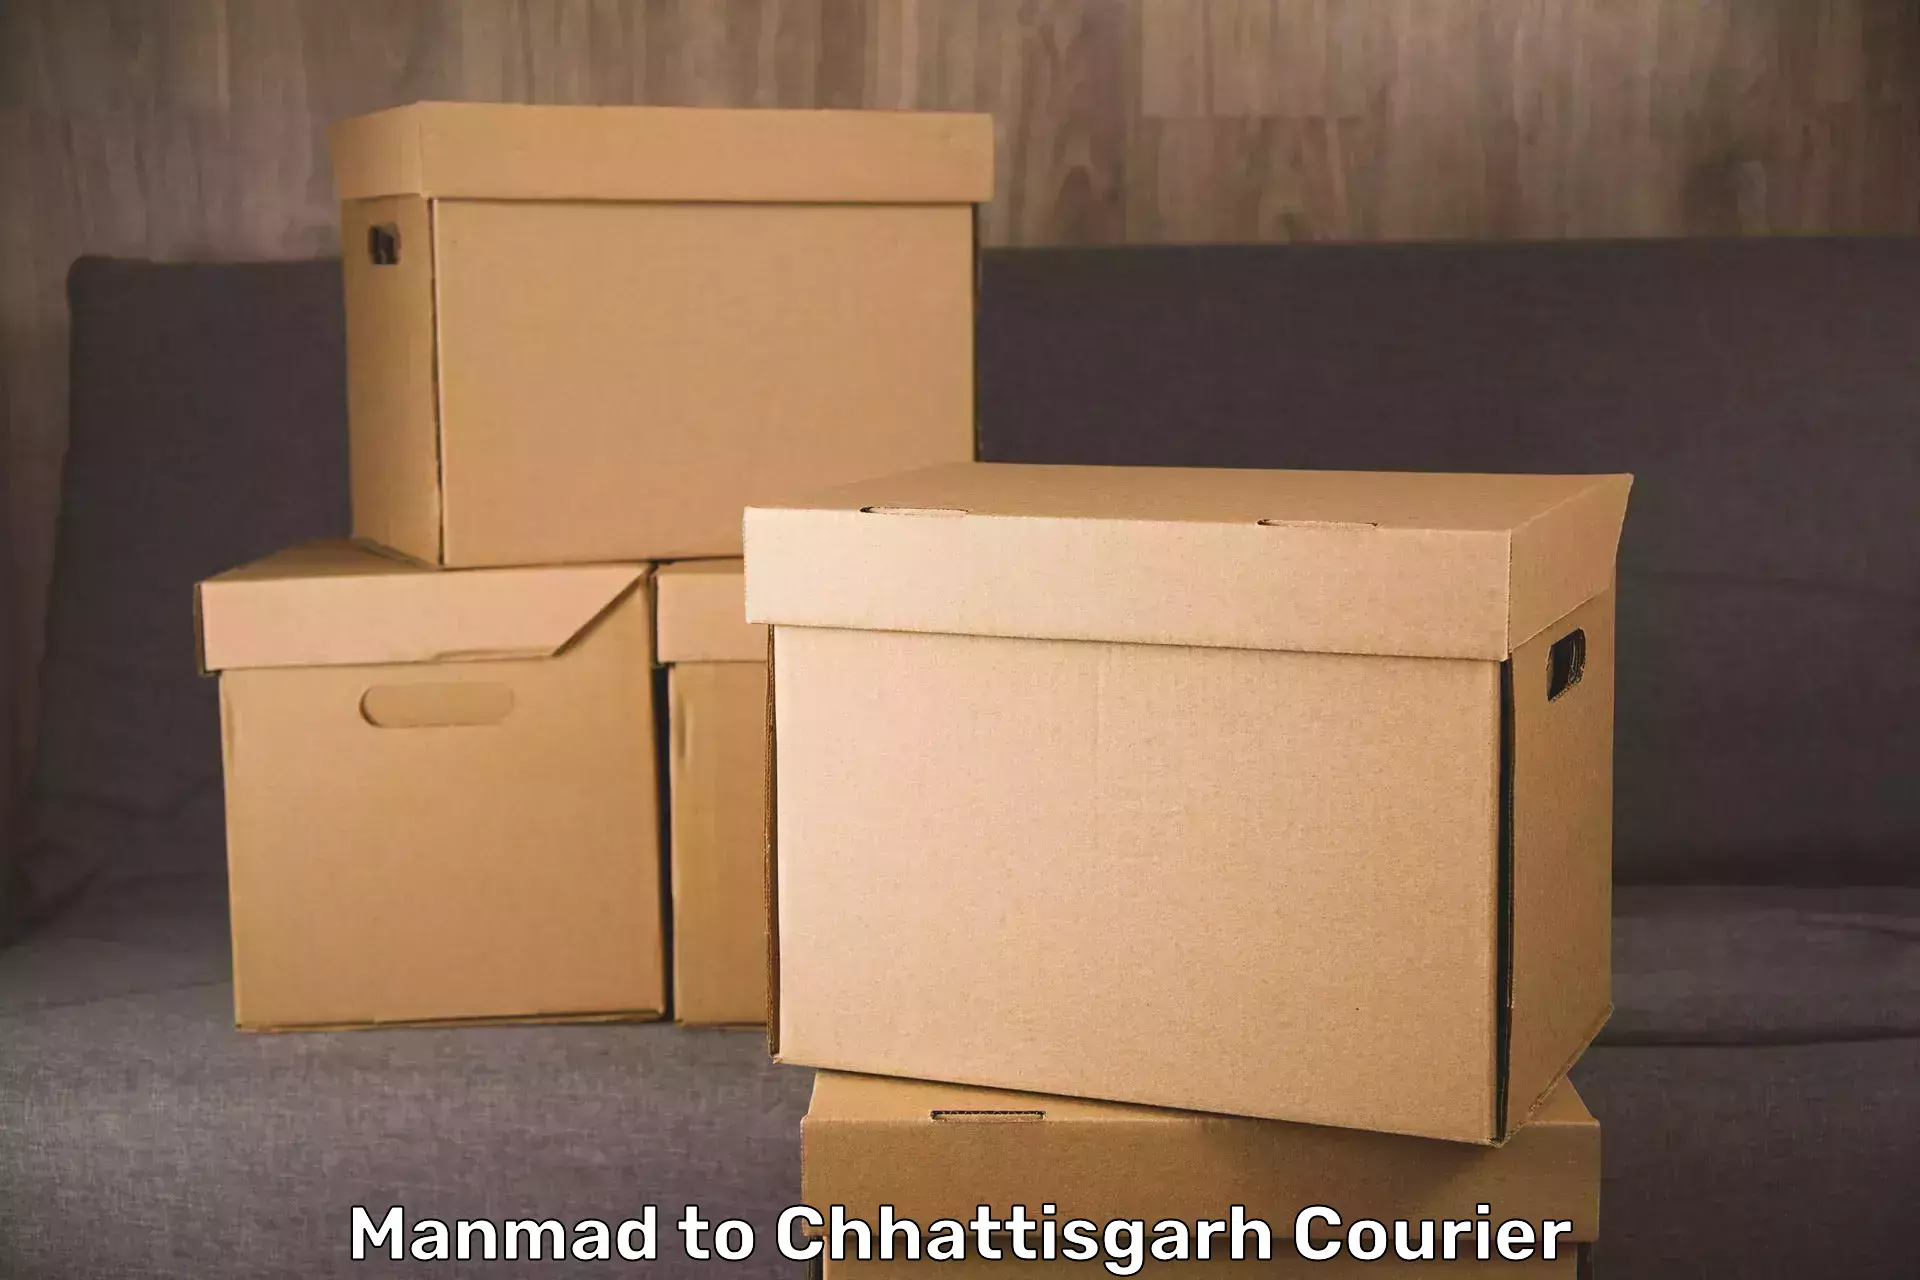 Luggage shipping specialists Manmad to Chhattisgarh